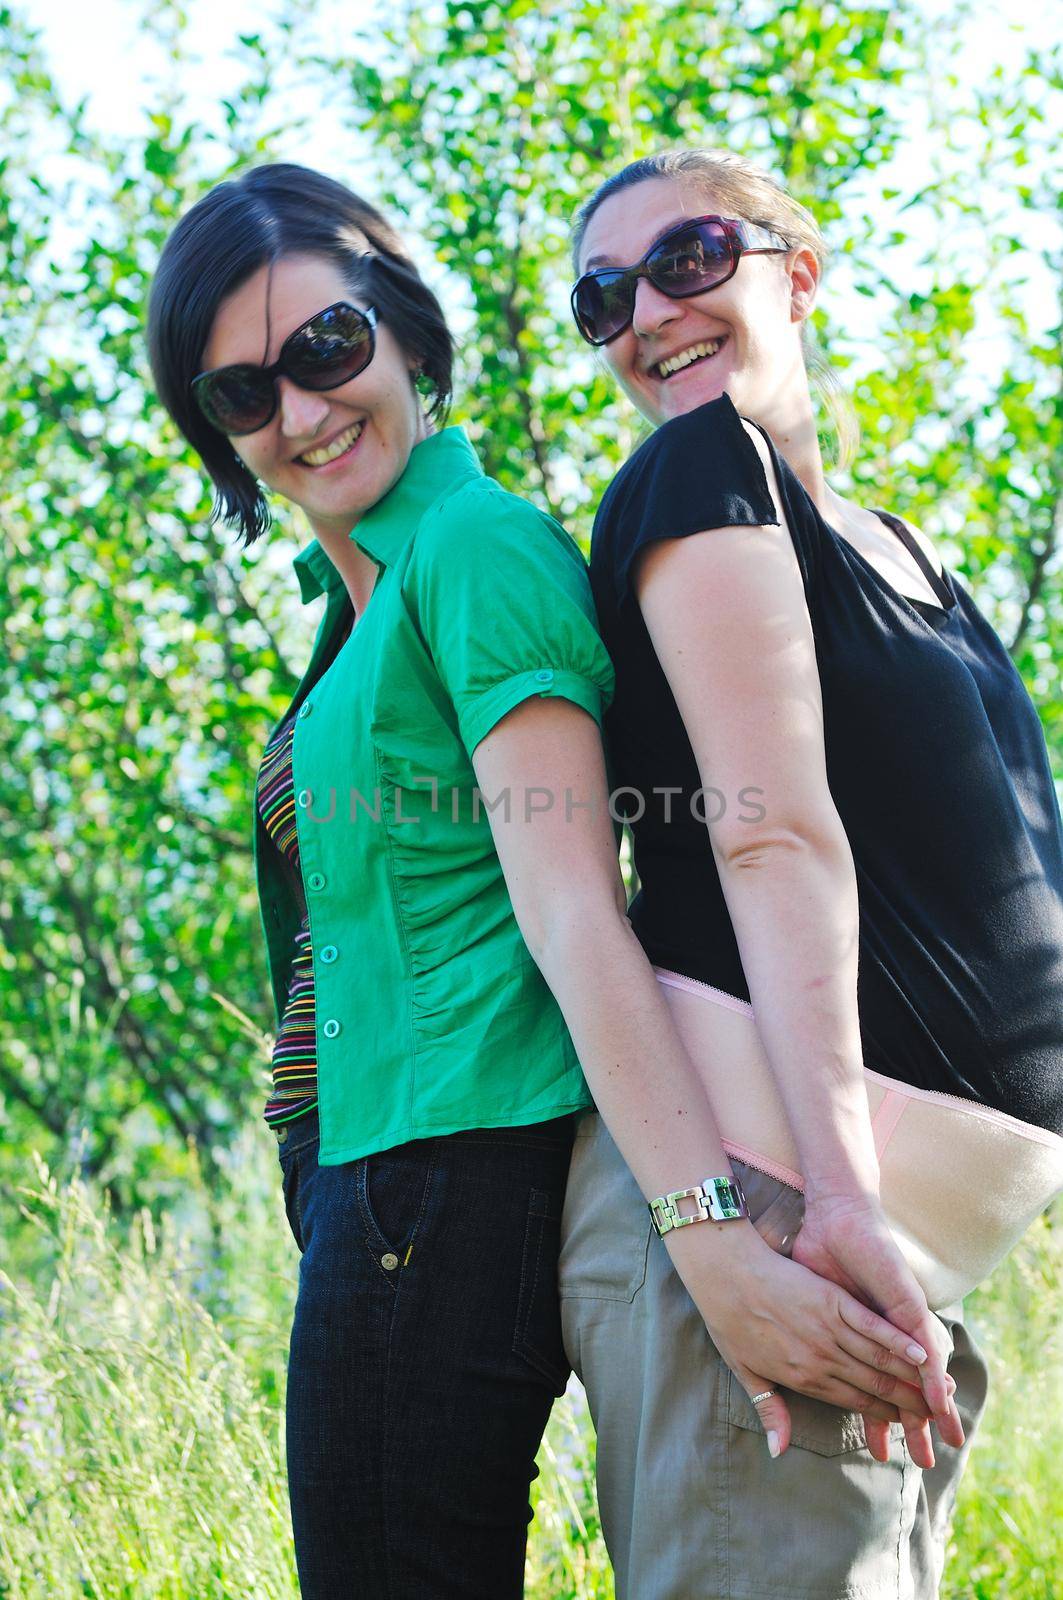 woman pragnant outdoor with friend smile and joy